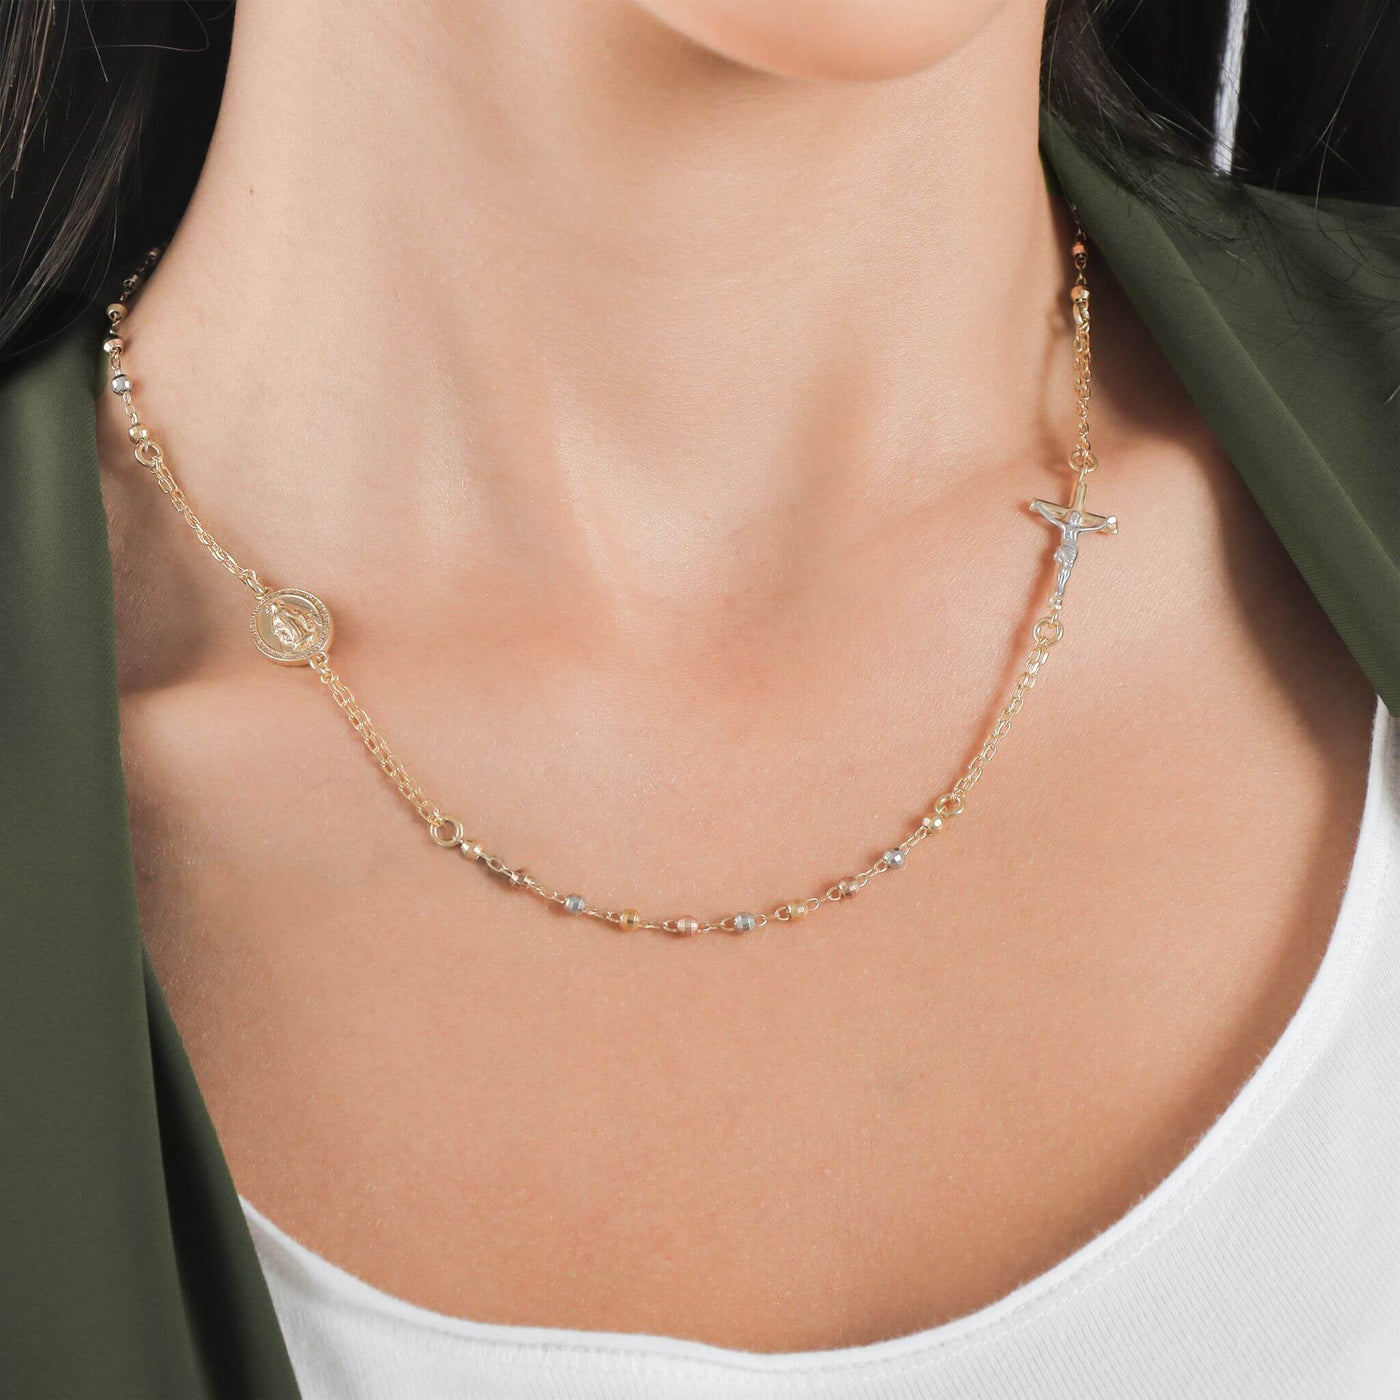 In-Line Faith Miraculous Necklace - Gloria Jewels